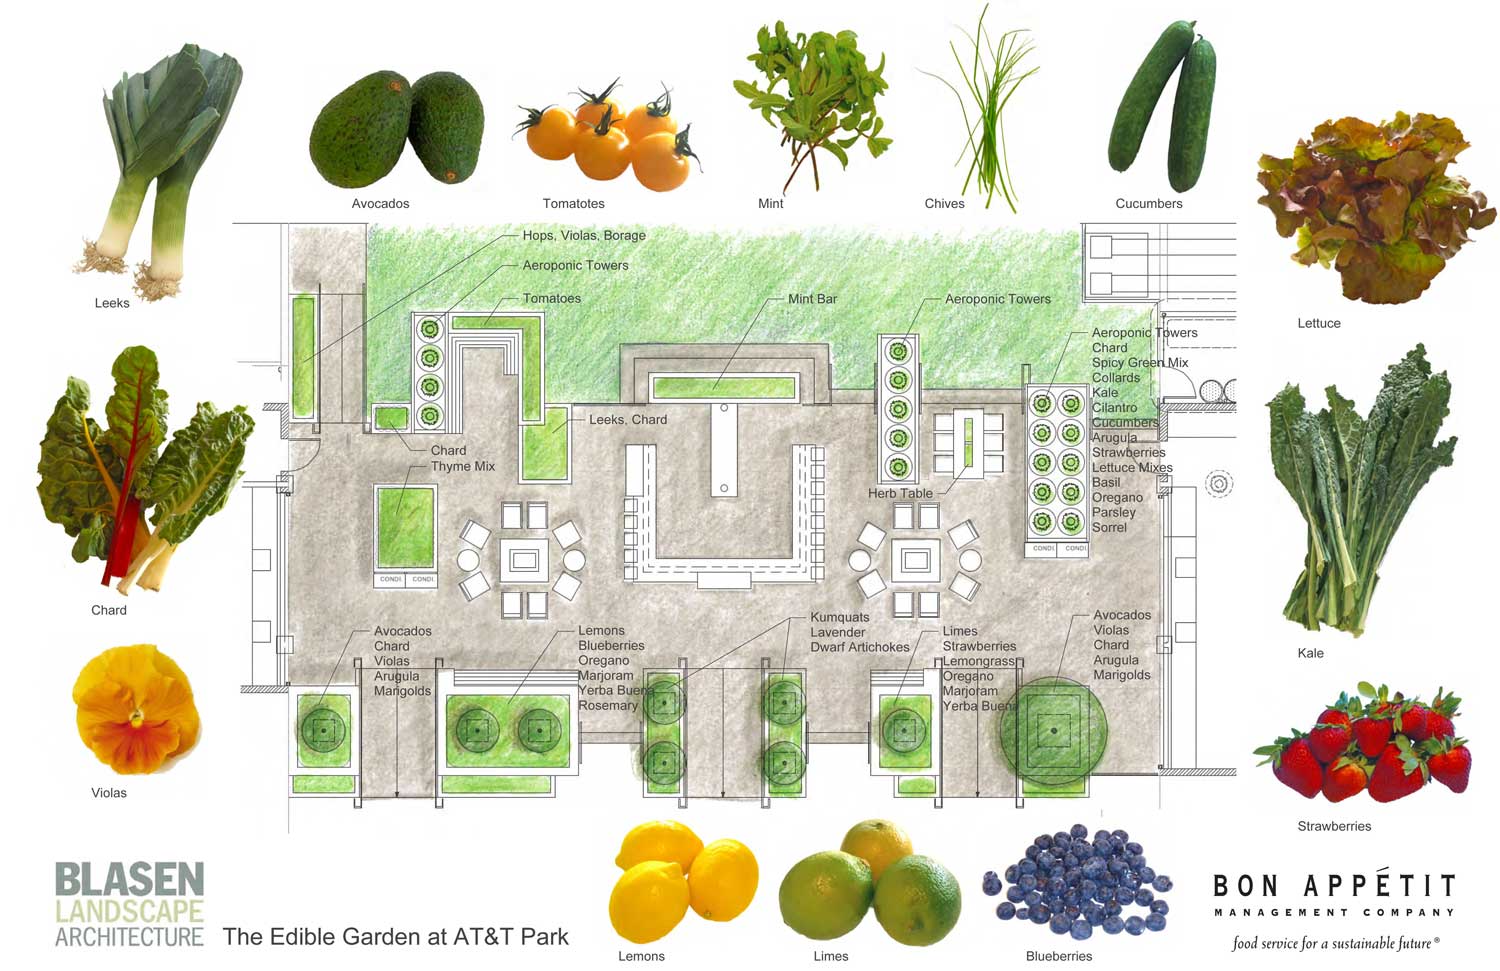 The Garden will offer bountiful summer fruits and vegetables. (Click picture to enlarge.)